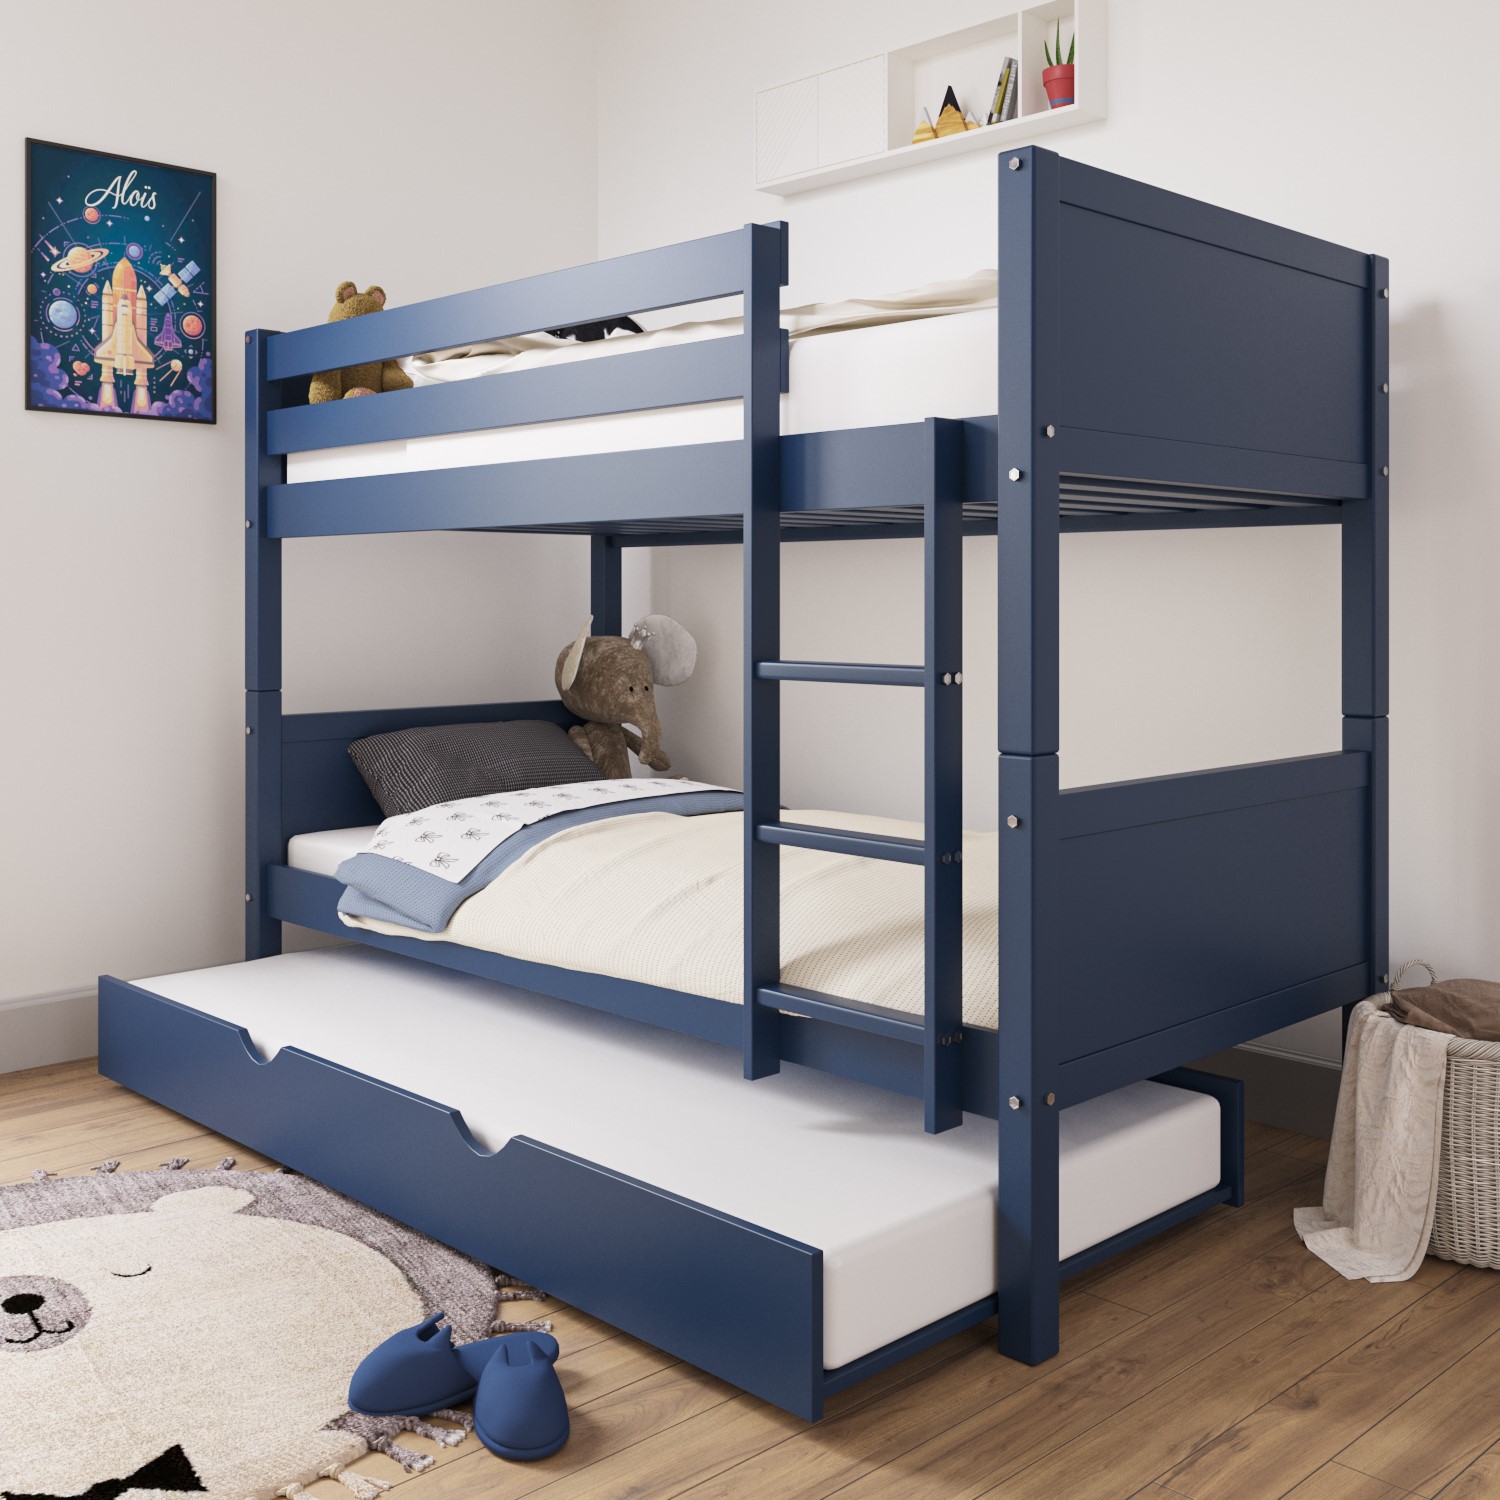 Navy Blue Wooden Detachable Bunk Bed, Childrens Bunk Beds With Pull Out Bed